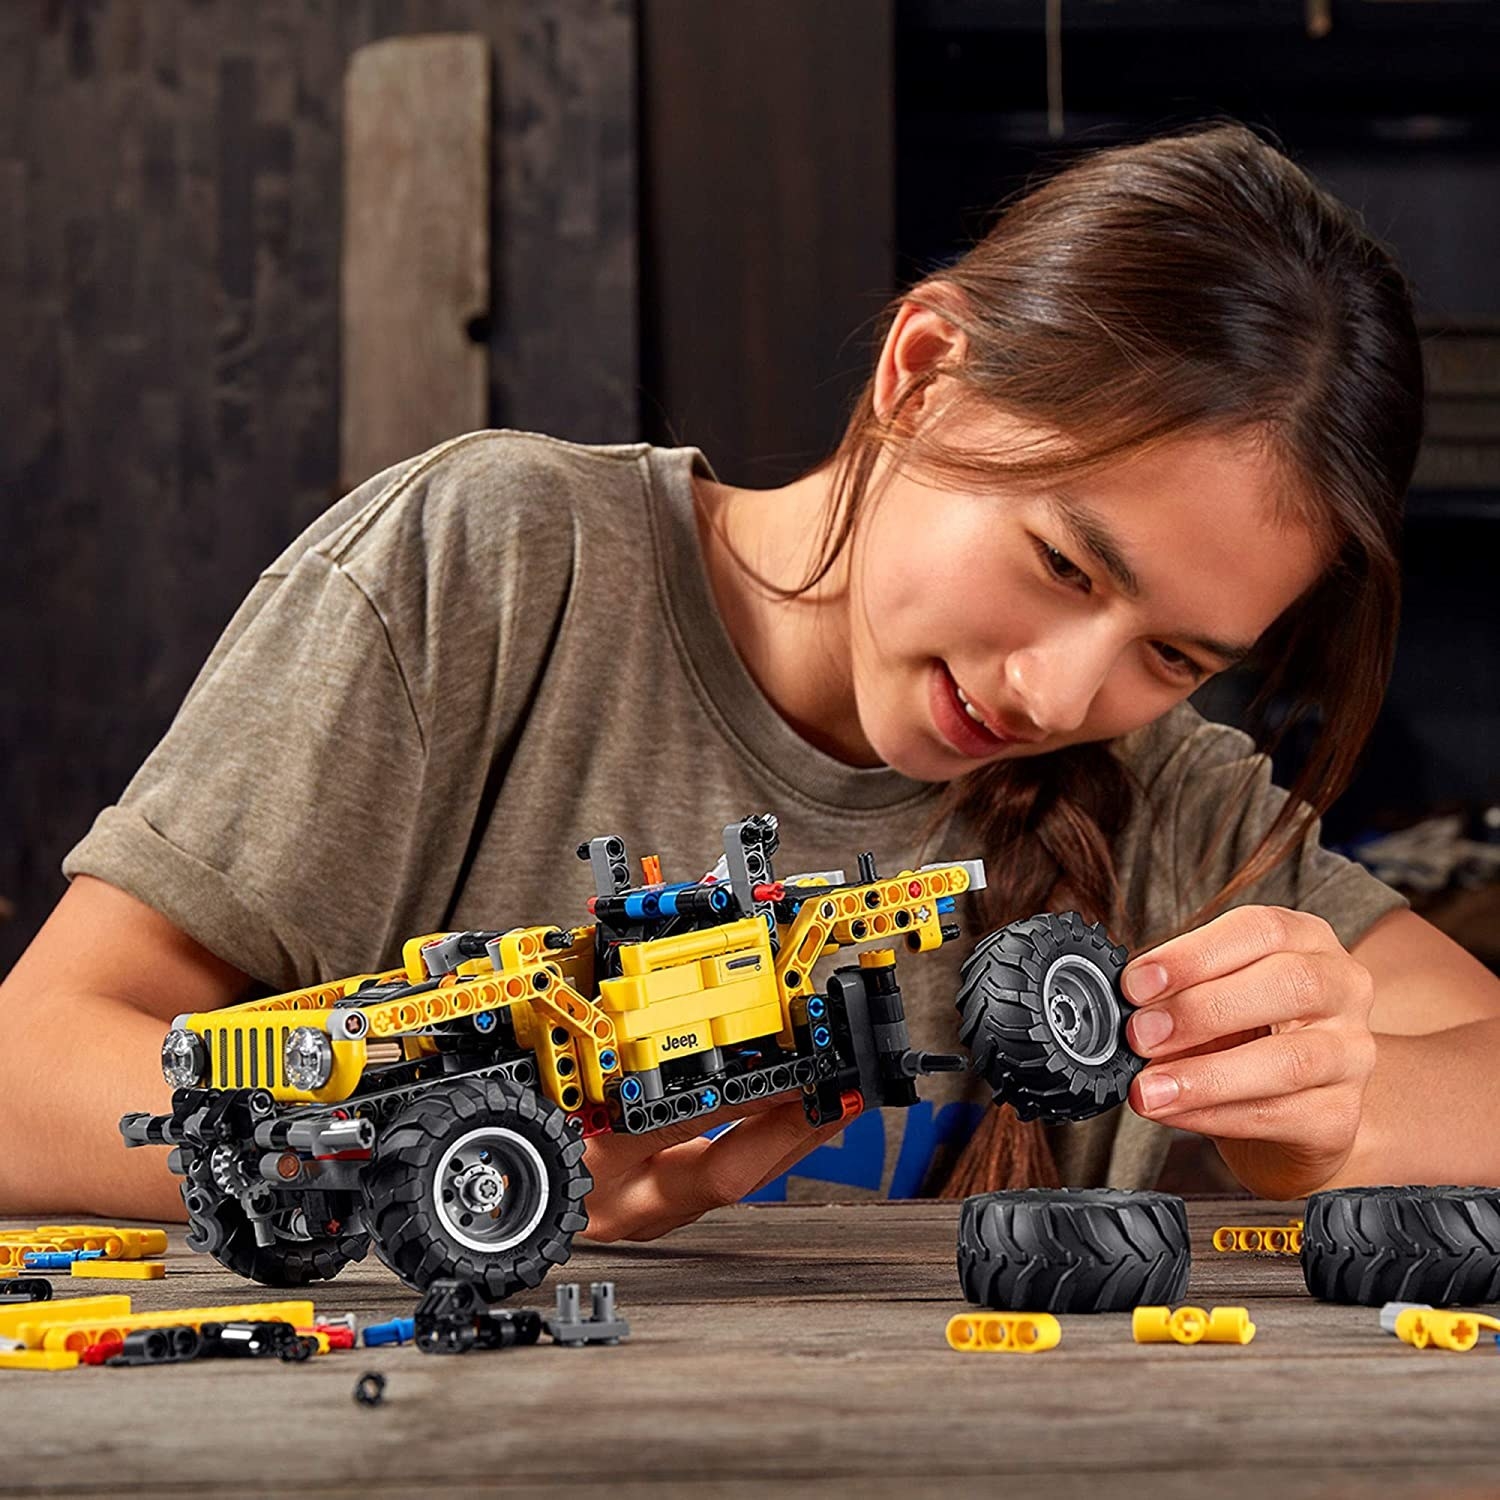 a person building their Jeep lego set